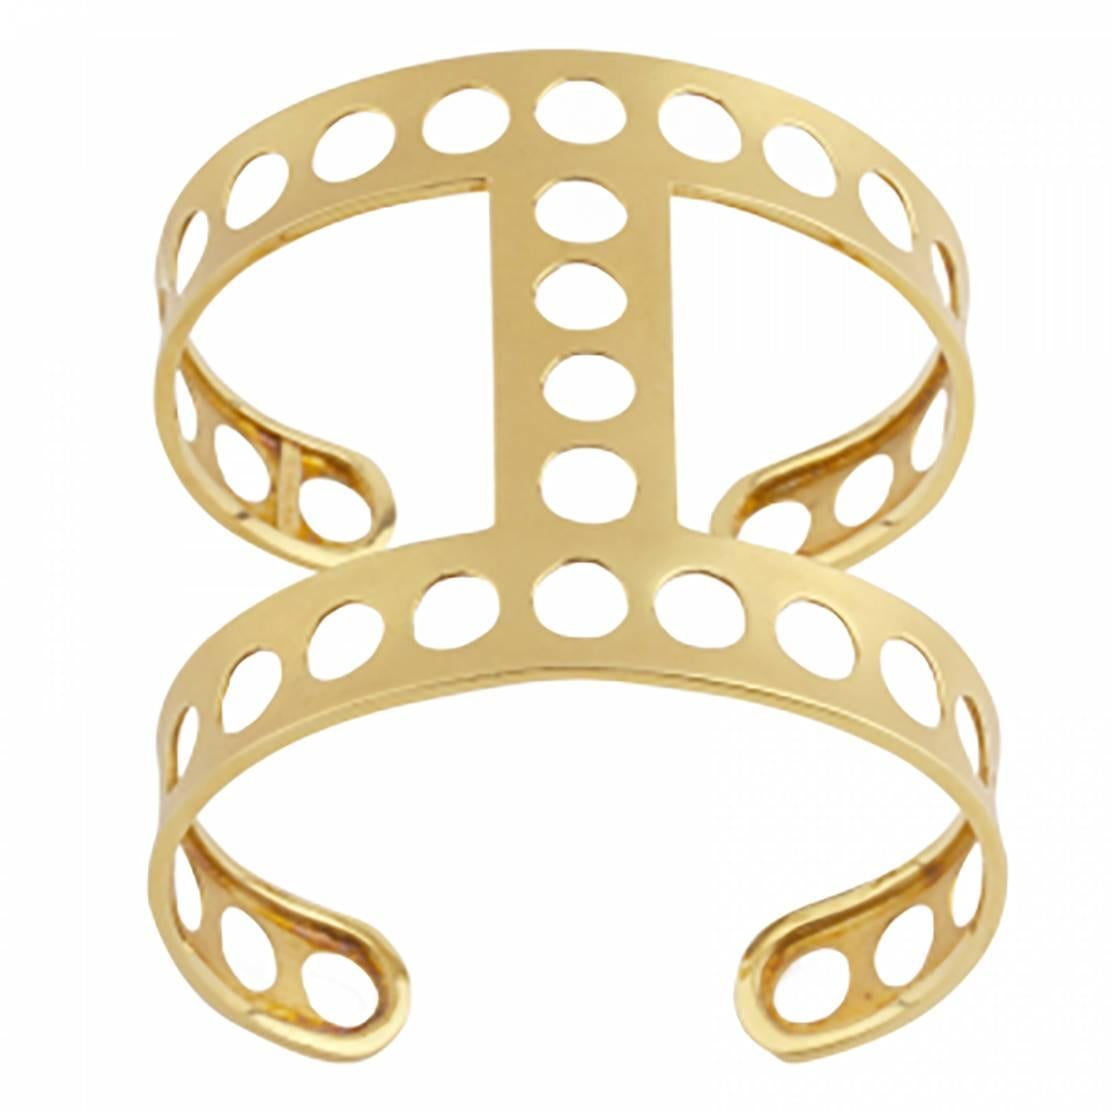 Metal: 18K Yellow Gold
Wrist Size: 6.5”
Cuff Length: approximately 2”
Ring Size: Standard US Ring Sizes
Ring Width: approximately 0.5”
Please allow for slight variations in measurements as pieces are handmade.

GLADIATOR COLLECTION © 2002
Youmna’s